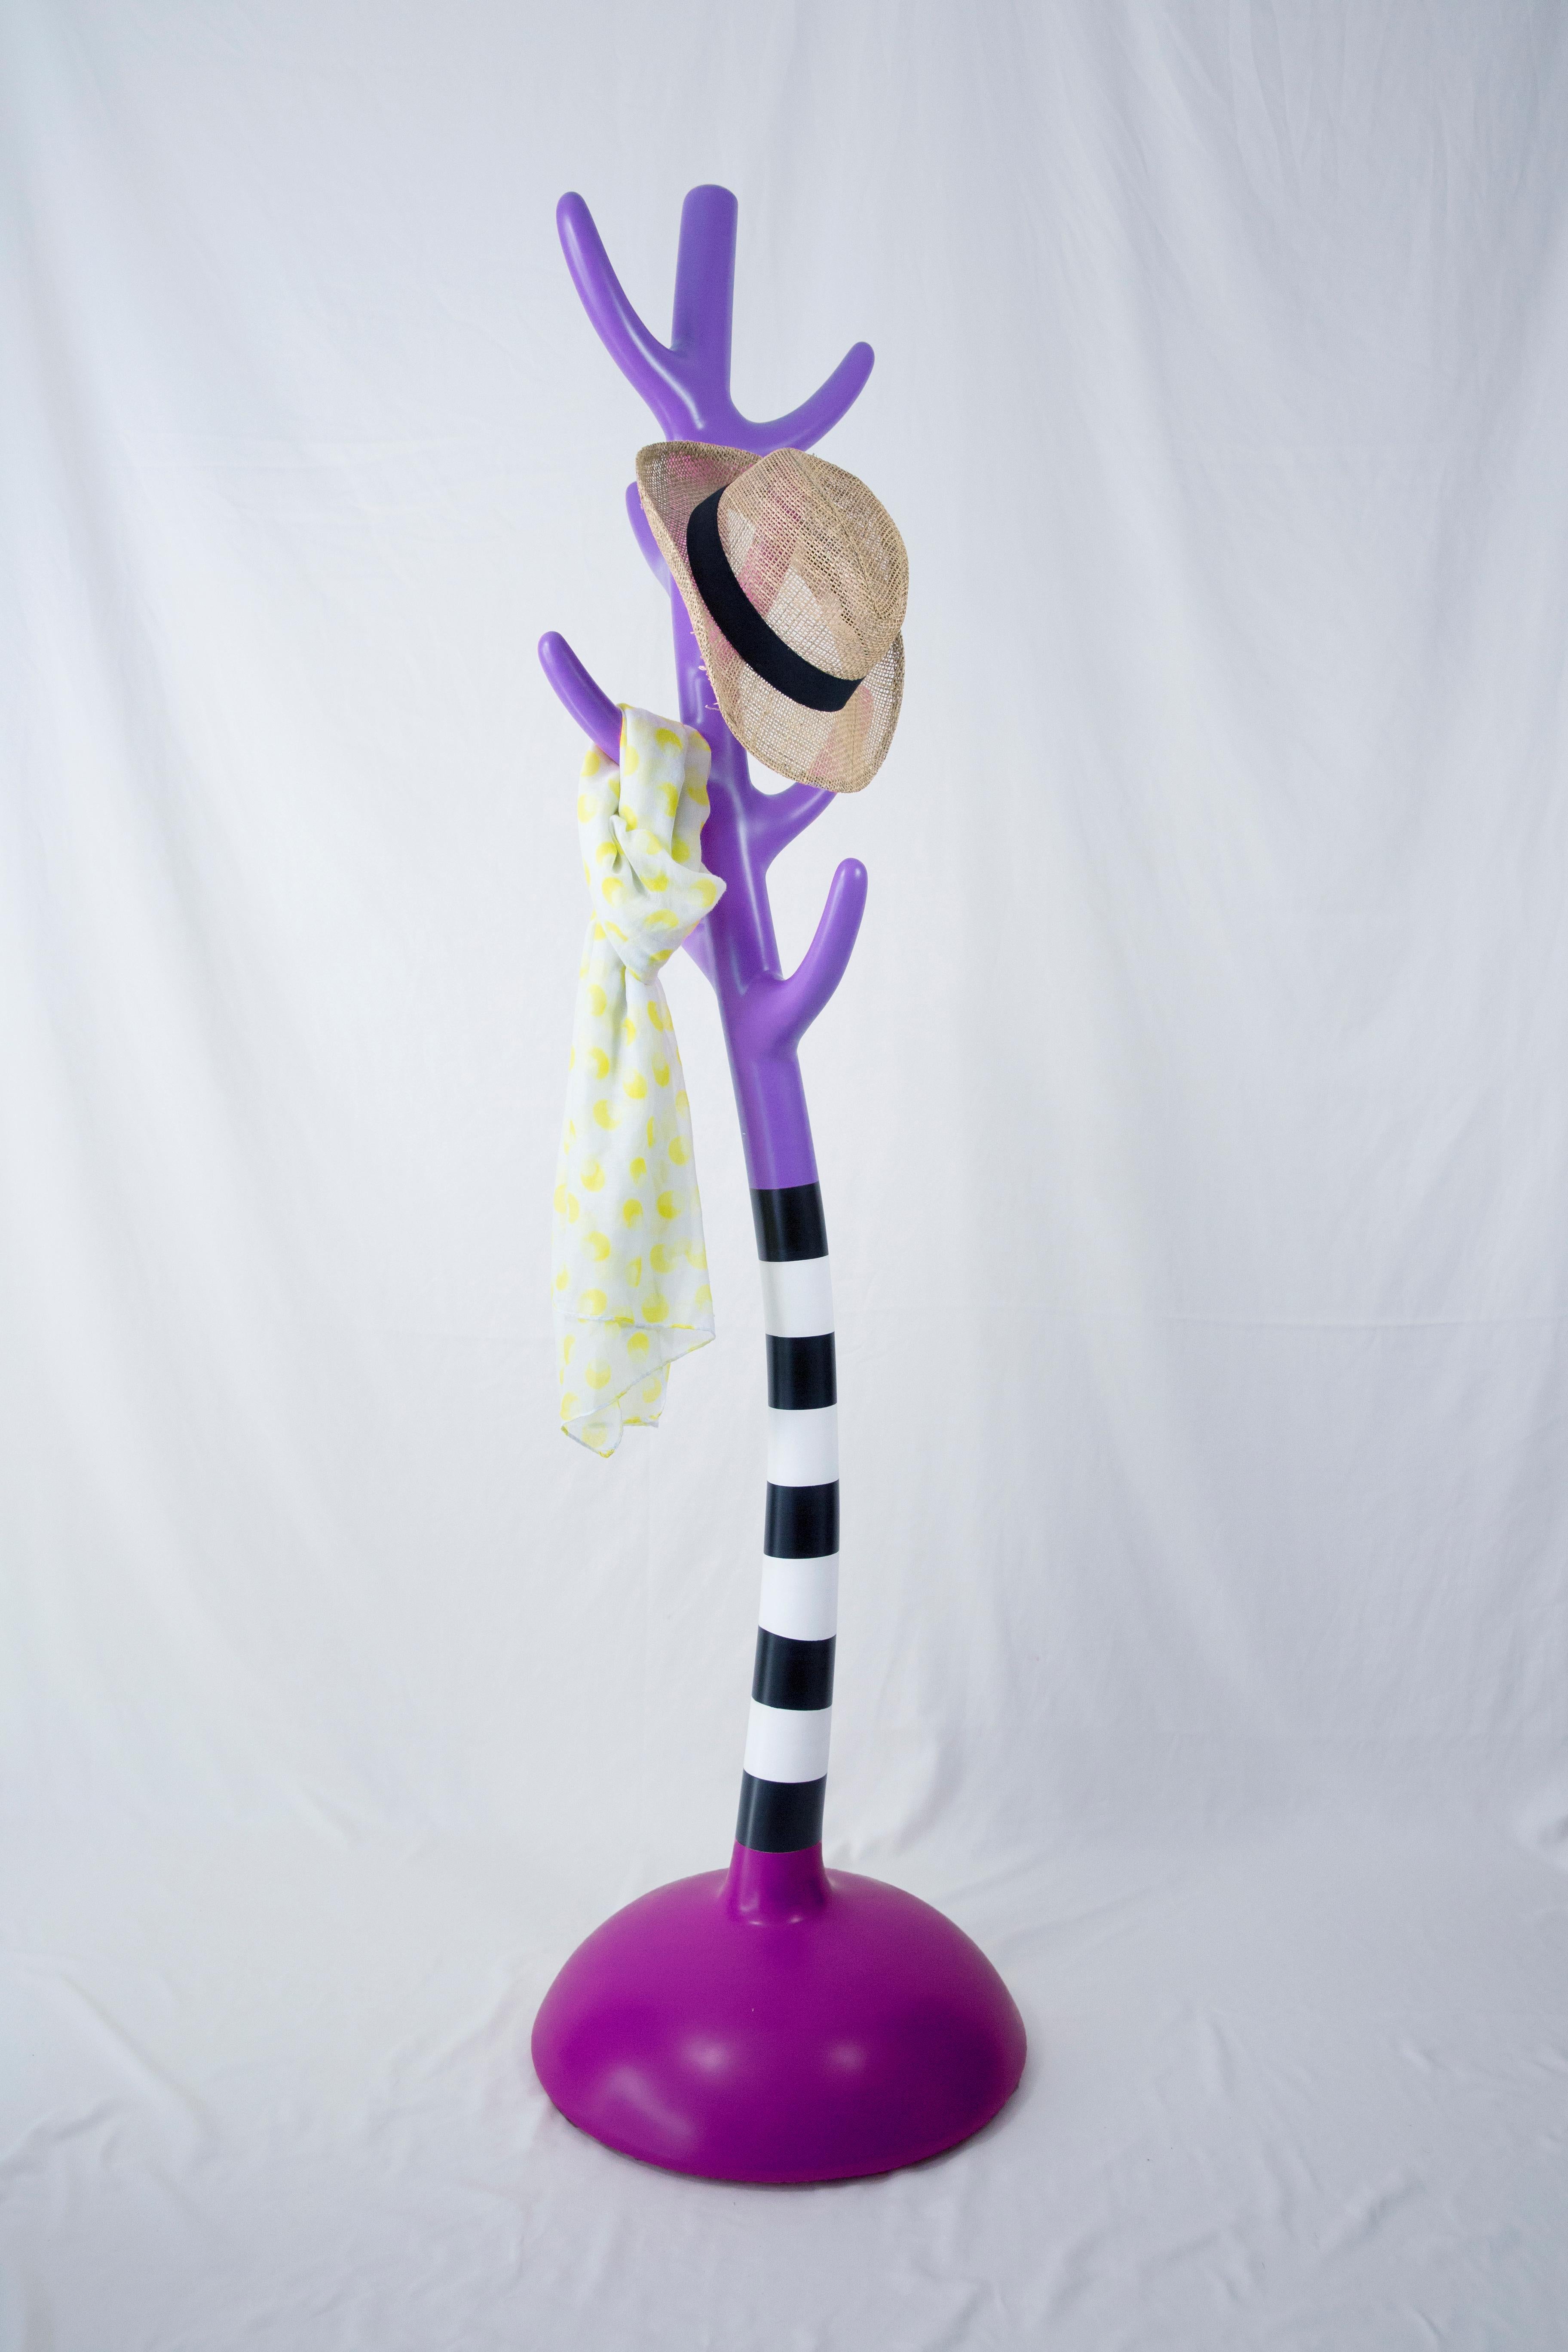 Crooked Lilac Colourful Coat Rack, Amorphous Sculpture, Artistic In New Condition For Sale In Istanbul, Maltepe